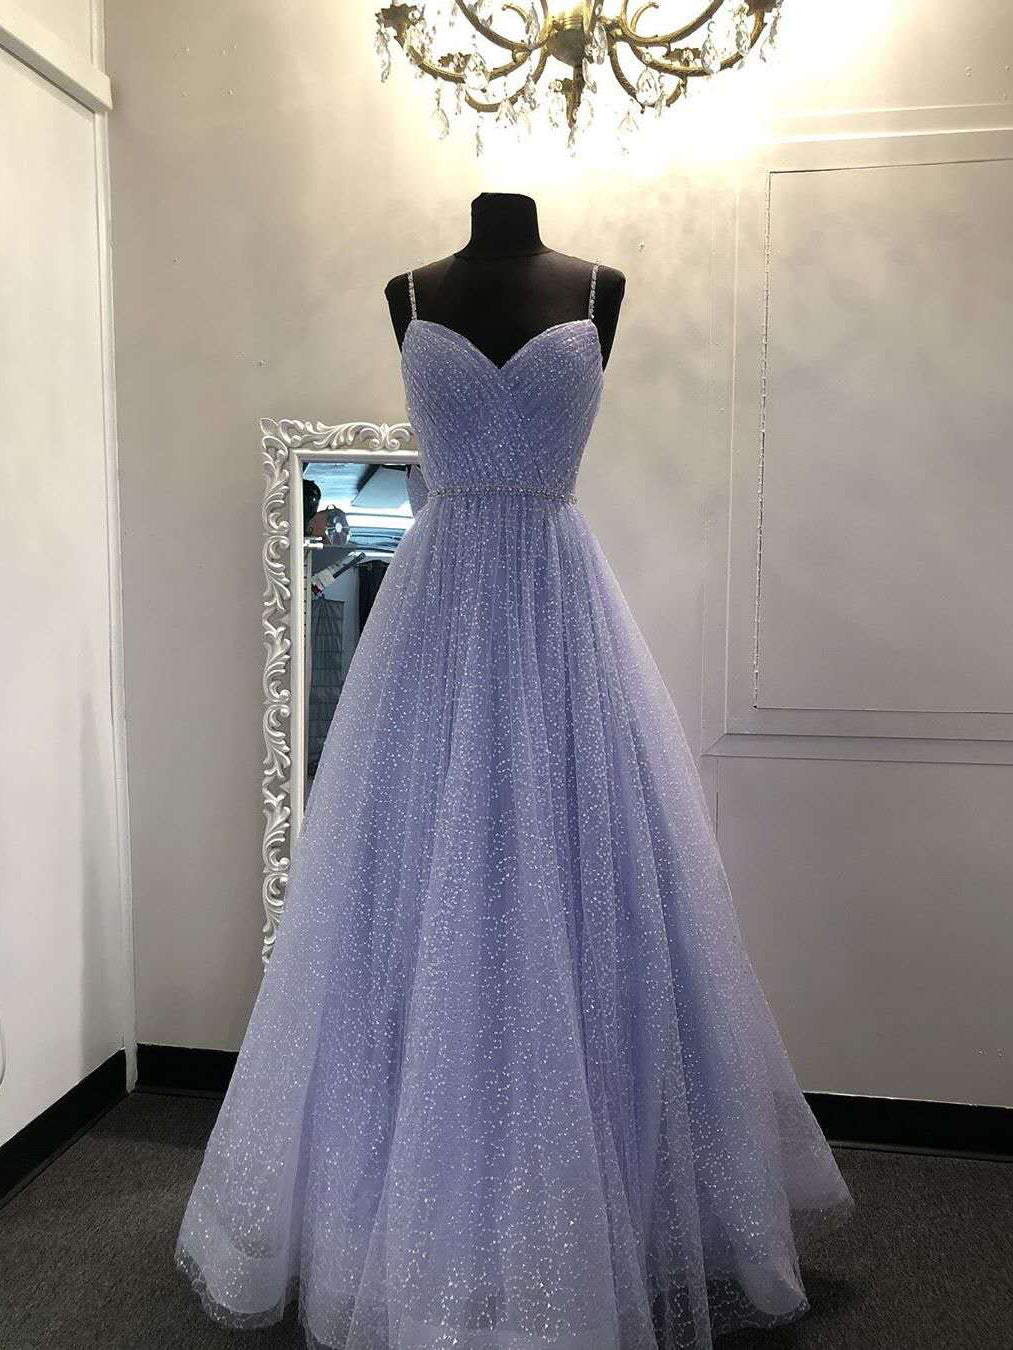 Lilac Sequin Tulle A-line Long Prom Dresses, 2020 Prom Dresses, Shiny Prom Dresses